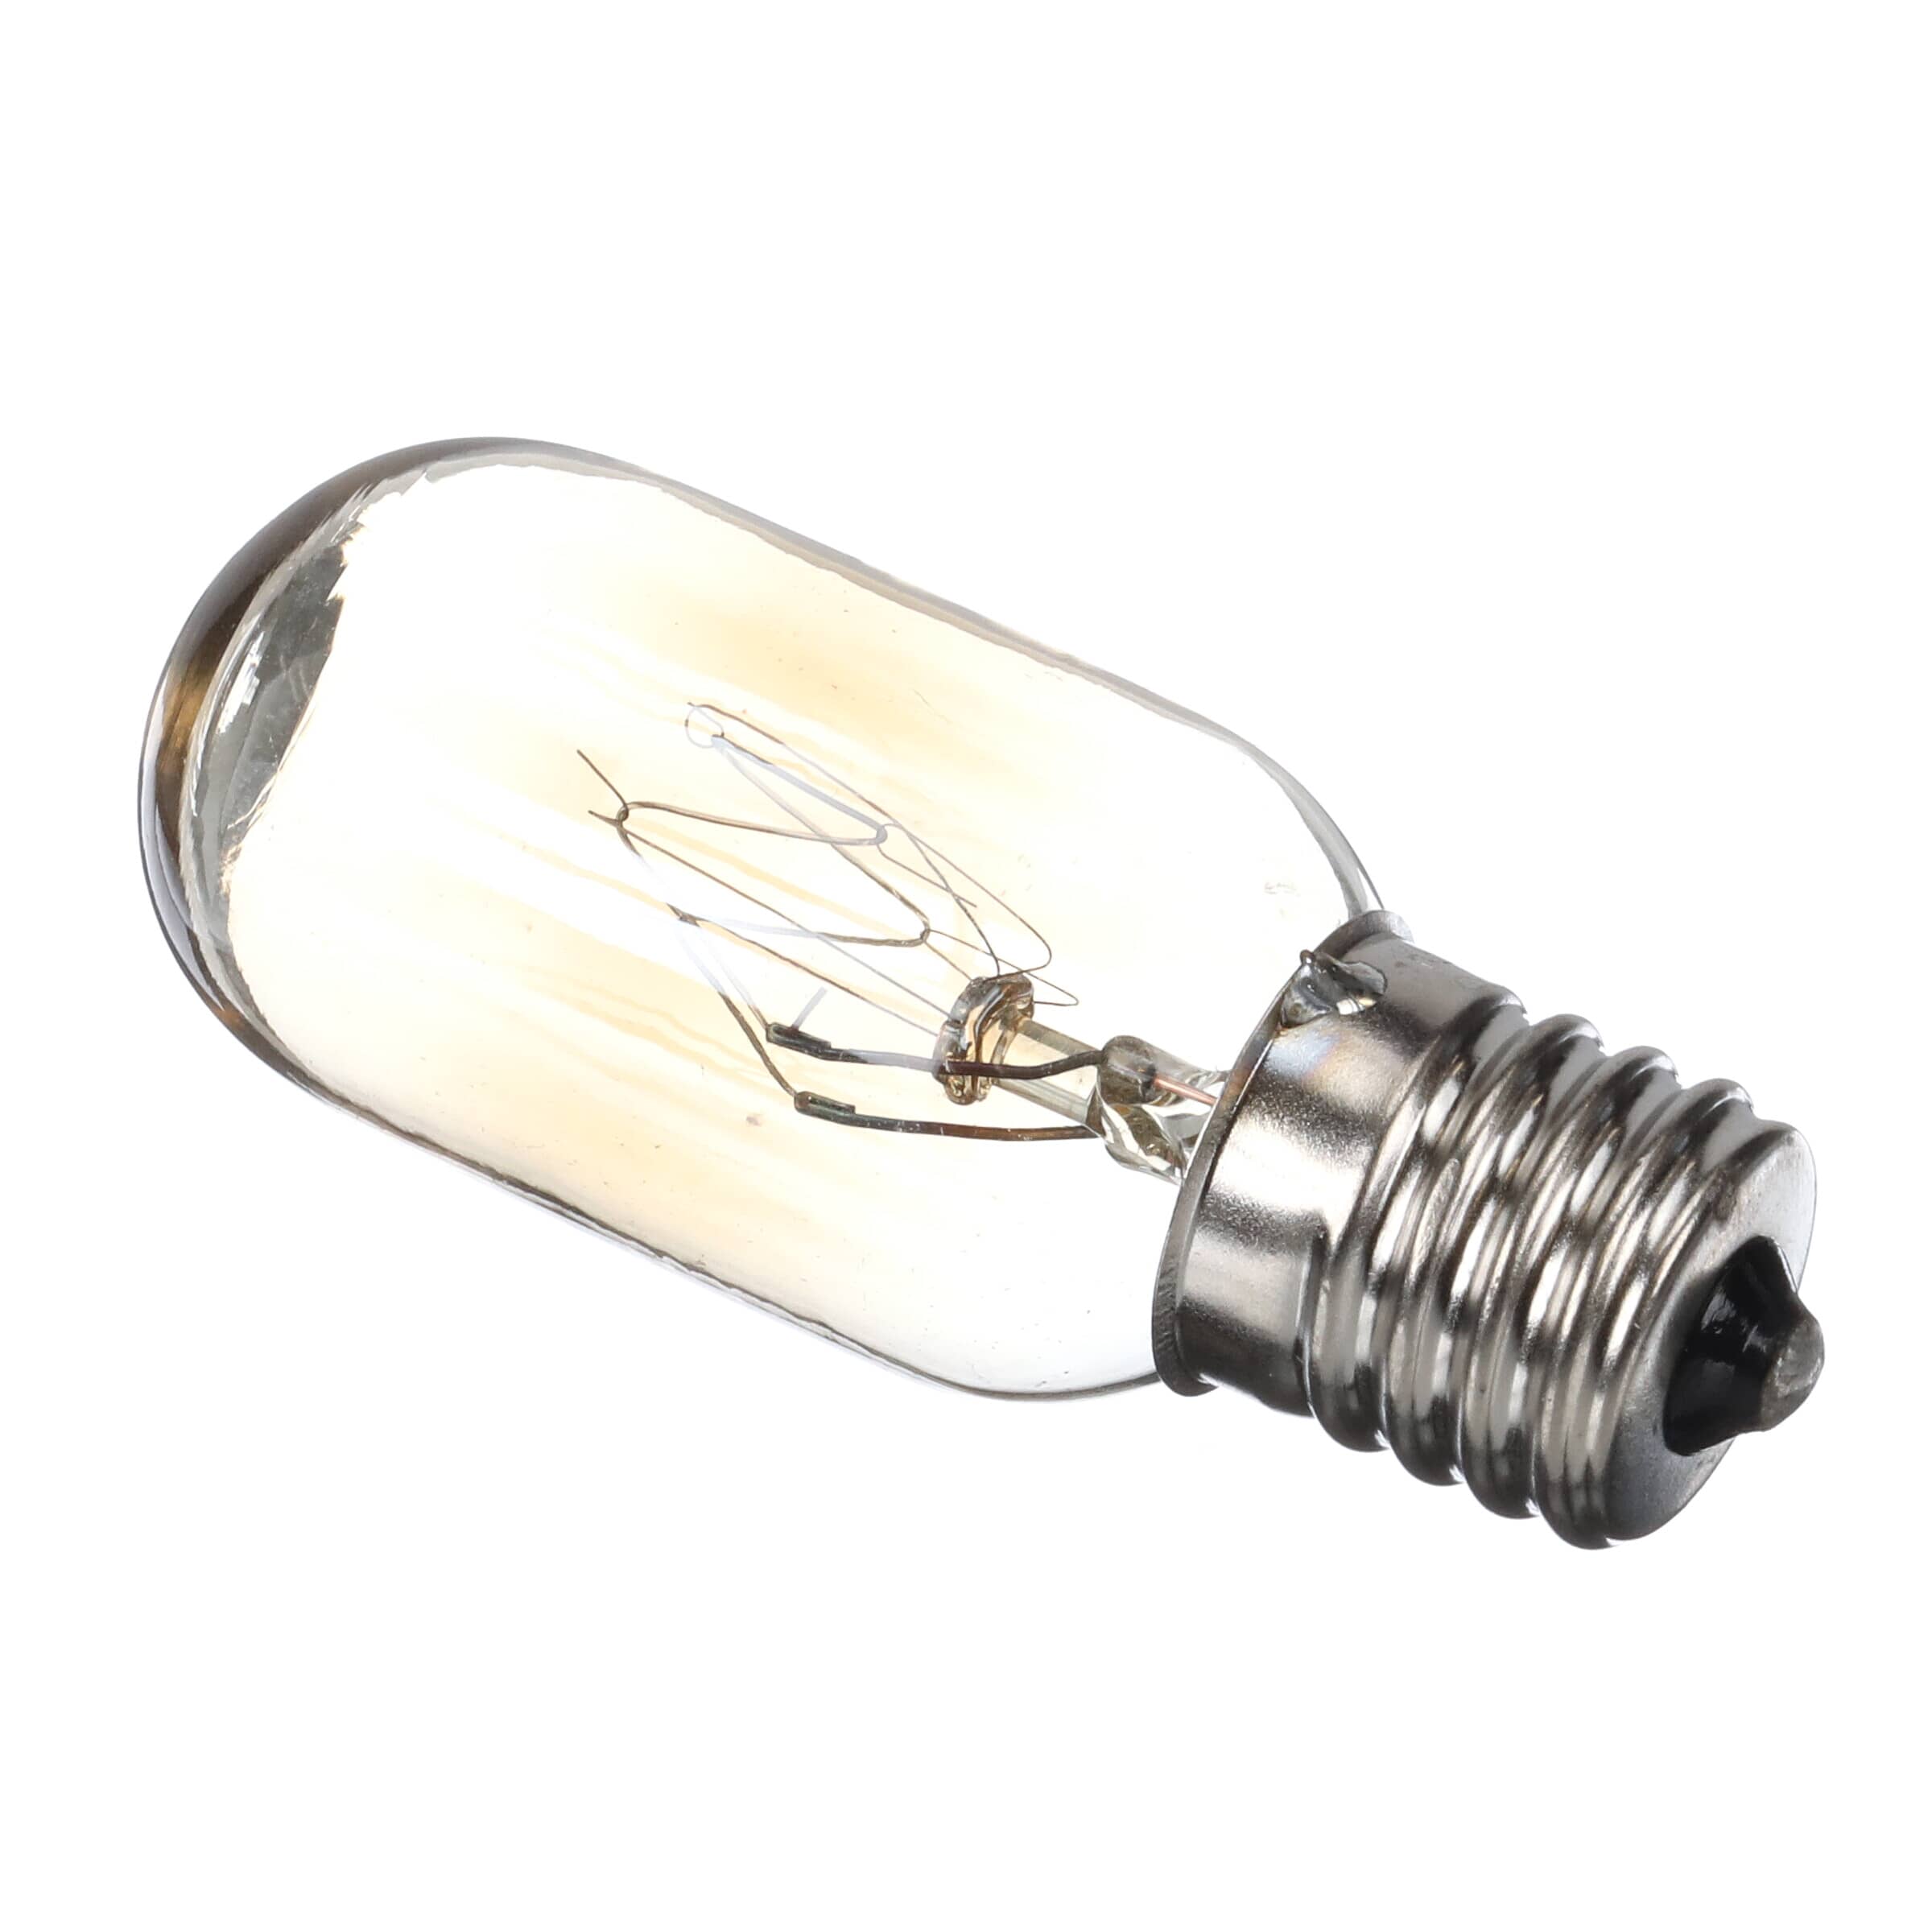 LG 6912W1Z004B Microwave Incandescent Lamp